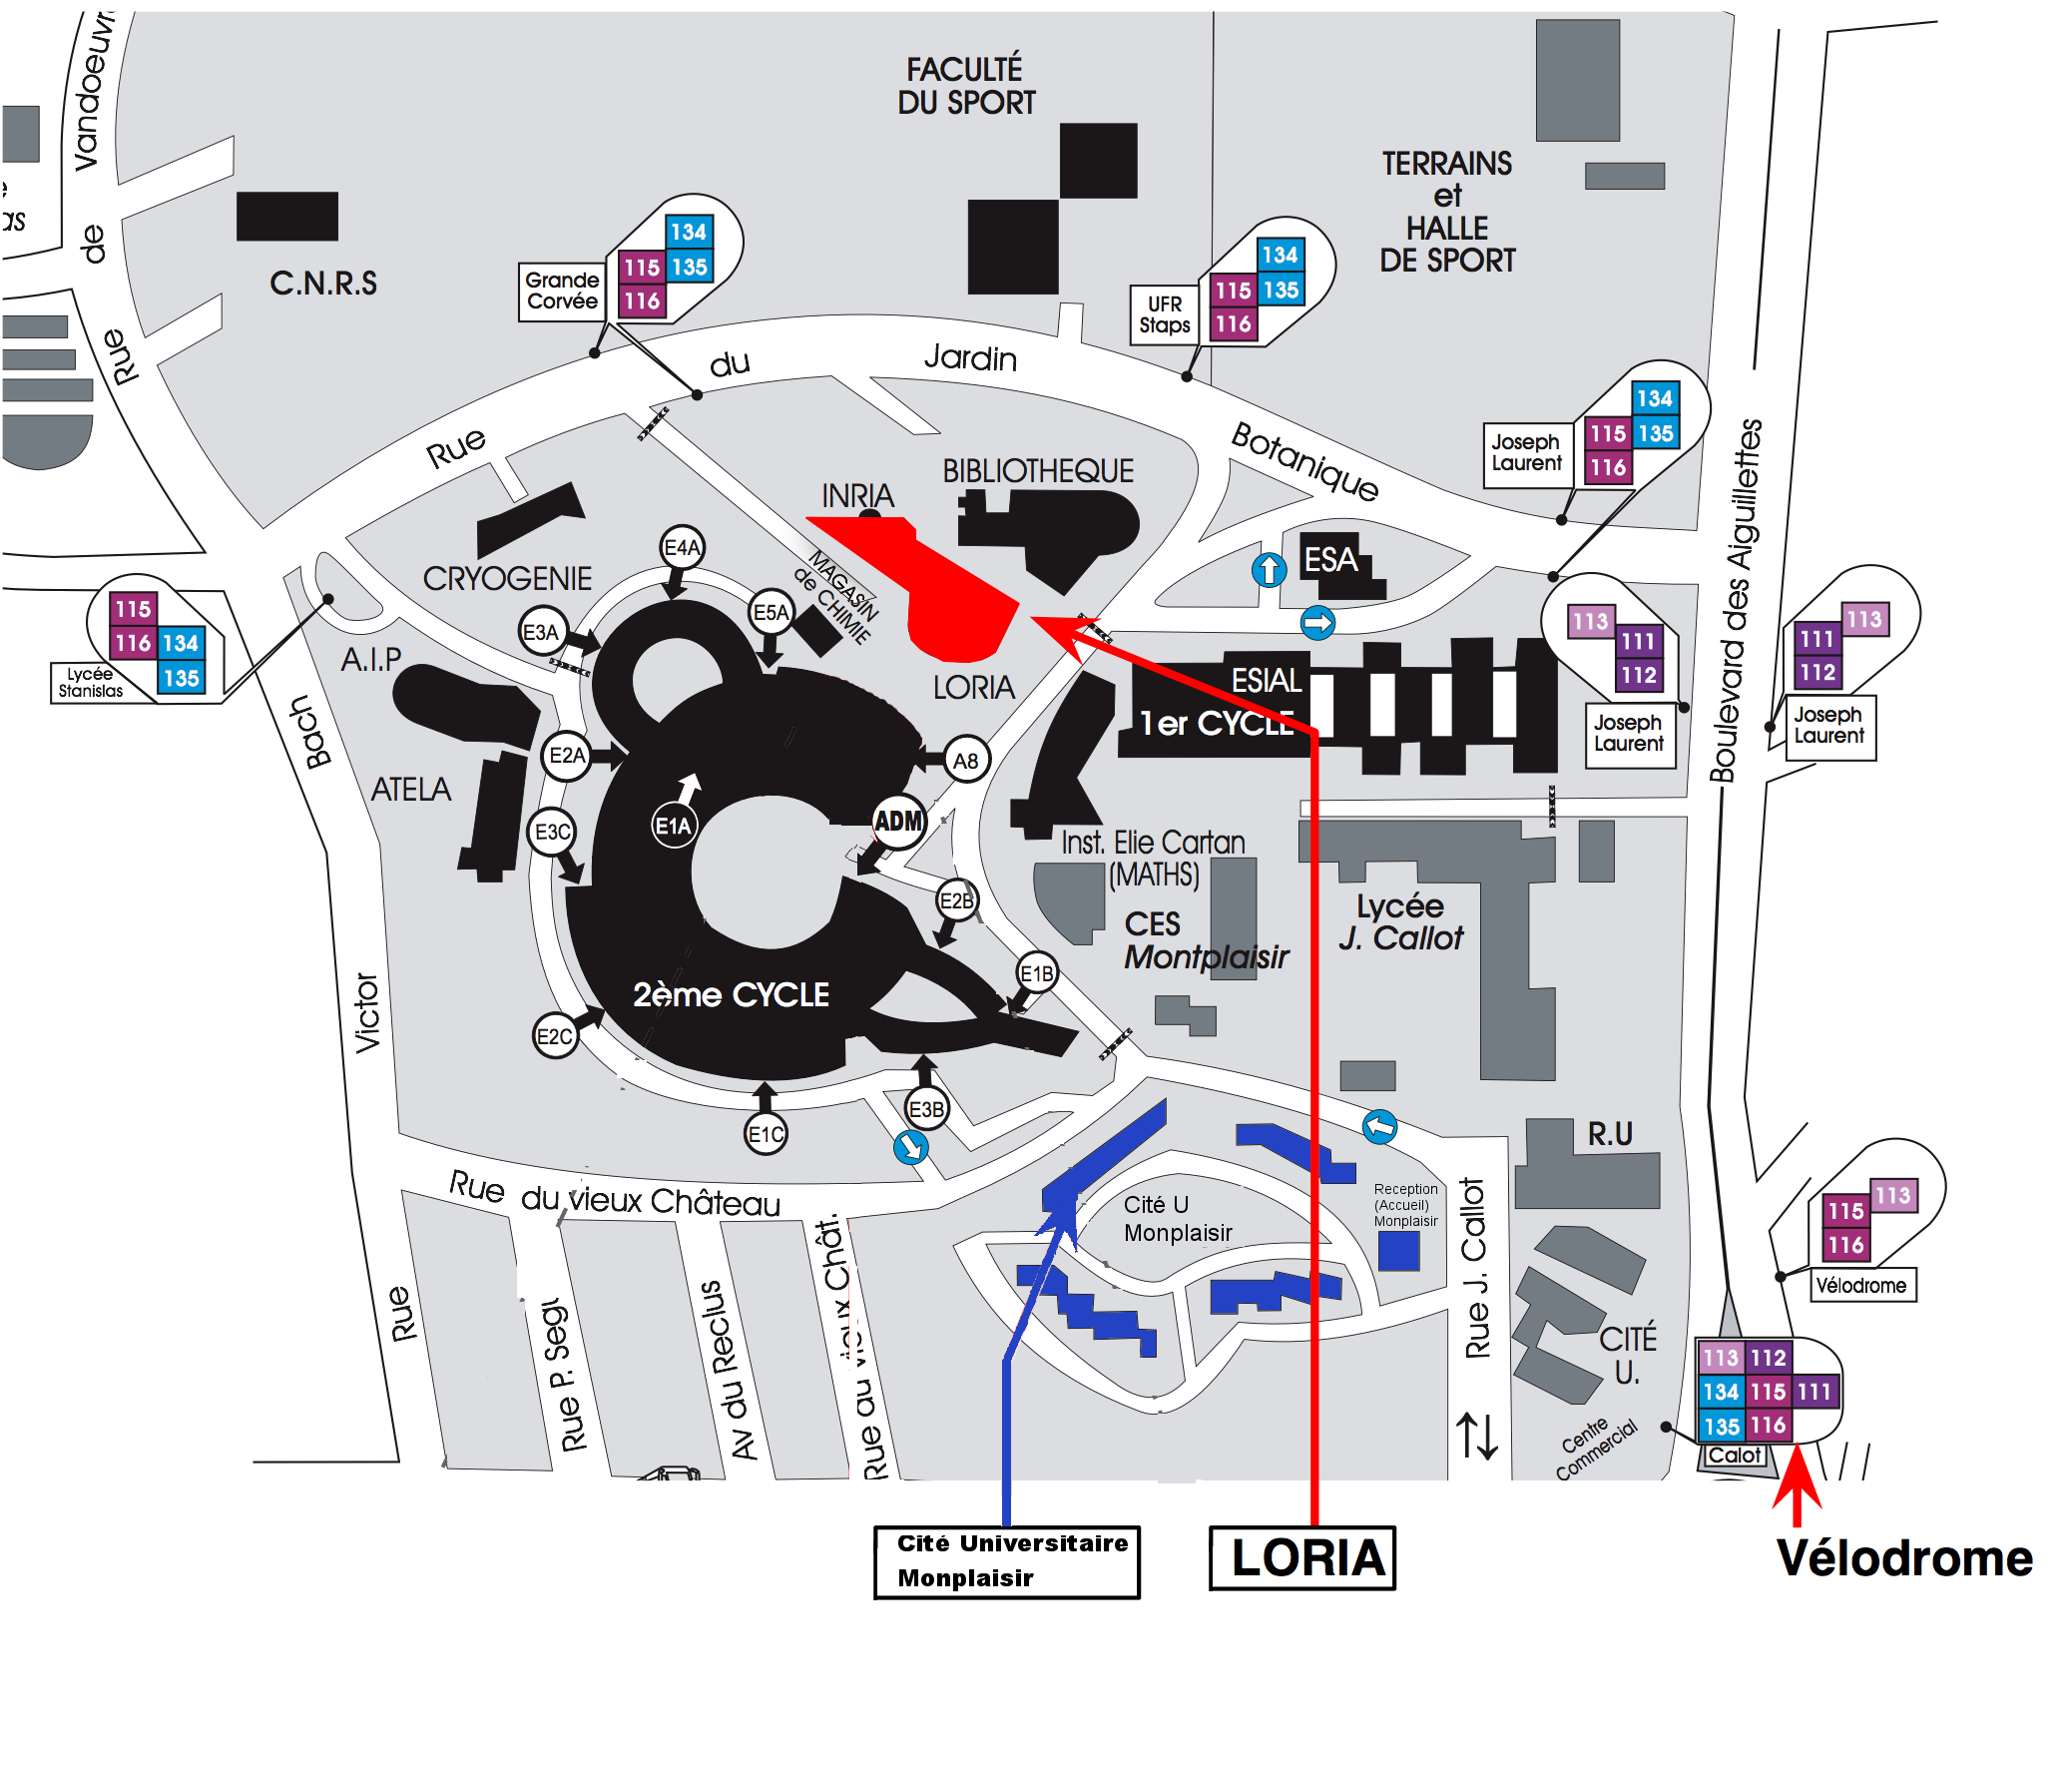 Detailed
campus map